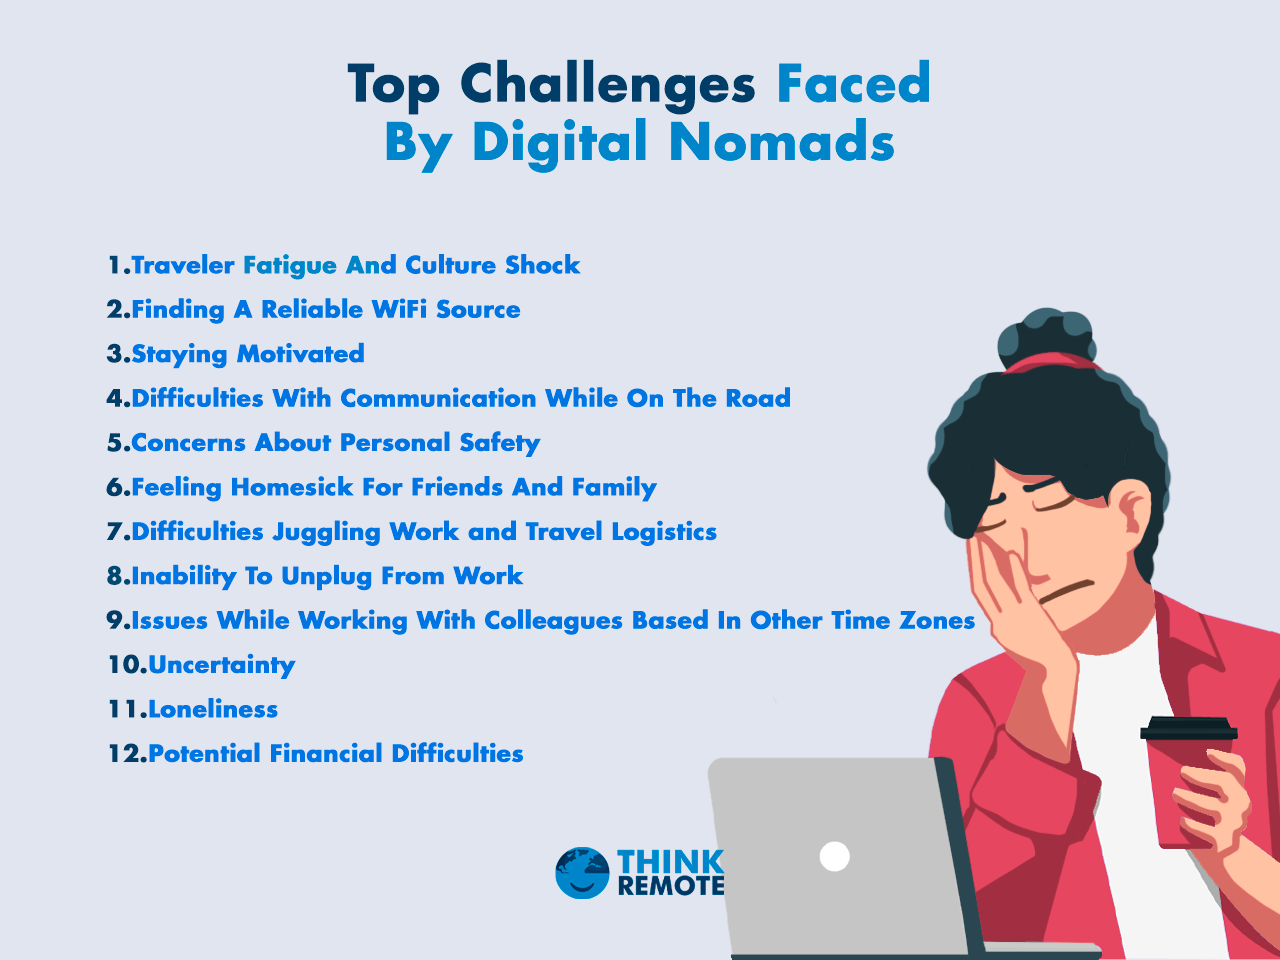 Top Challenges Faced By Digital Nomads.